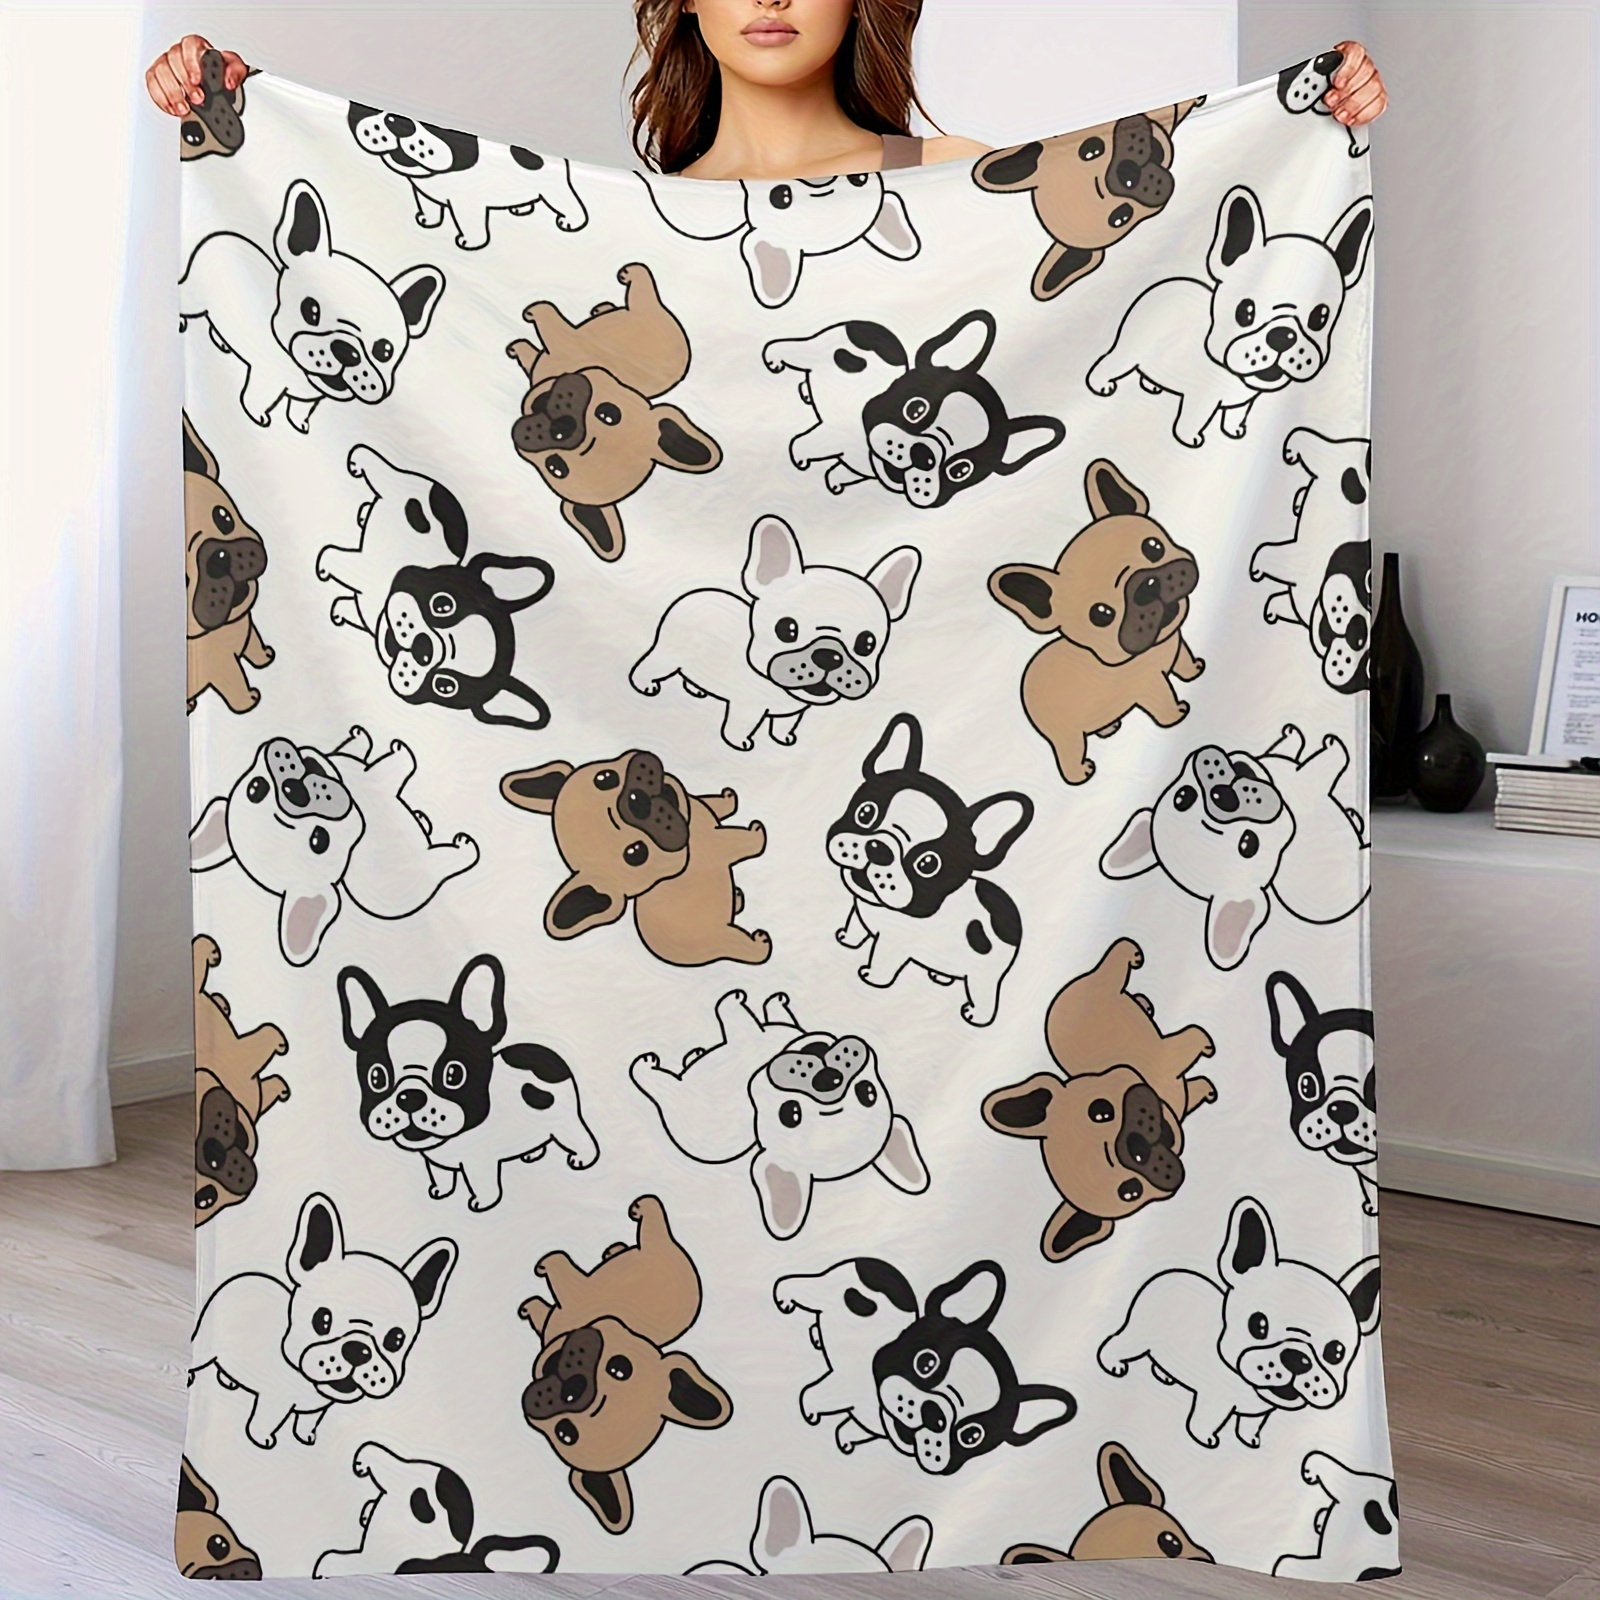 

Cozy French Bulldog Flannel Throw Blanket - Soft, Warm & Tear-resistant For Couch, Bed, Office, And Travel - All-season Gift Idea Blanket Comforter